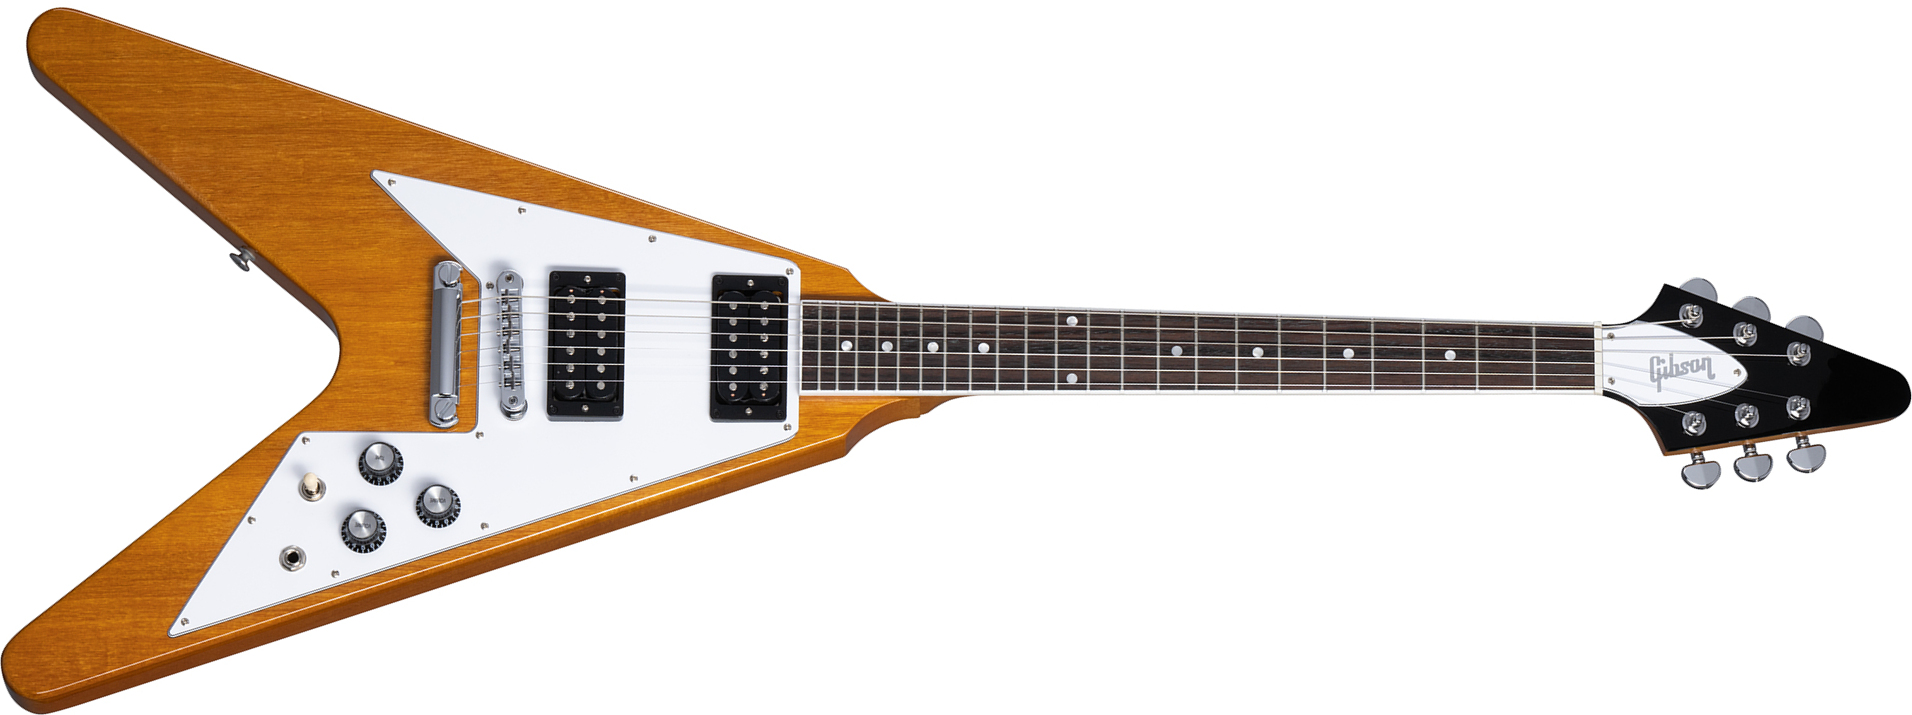 Gibson Flying V 70s Original 2h Ht Rw - Antique Natural - Guitarra electrica metalica - Main picture